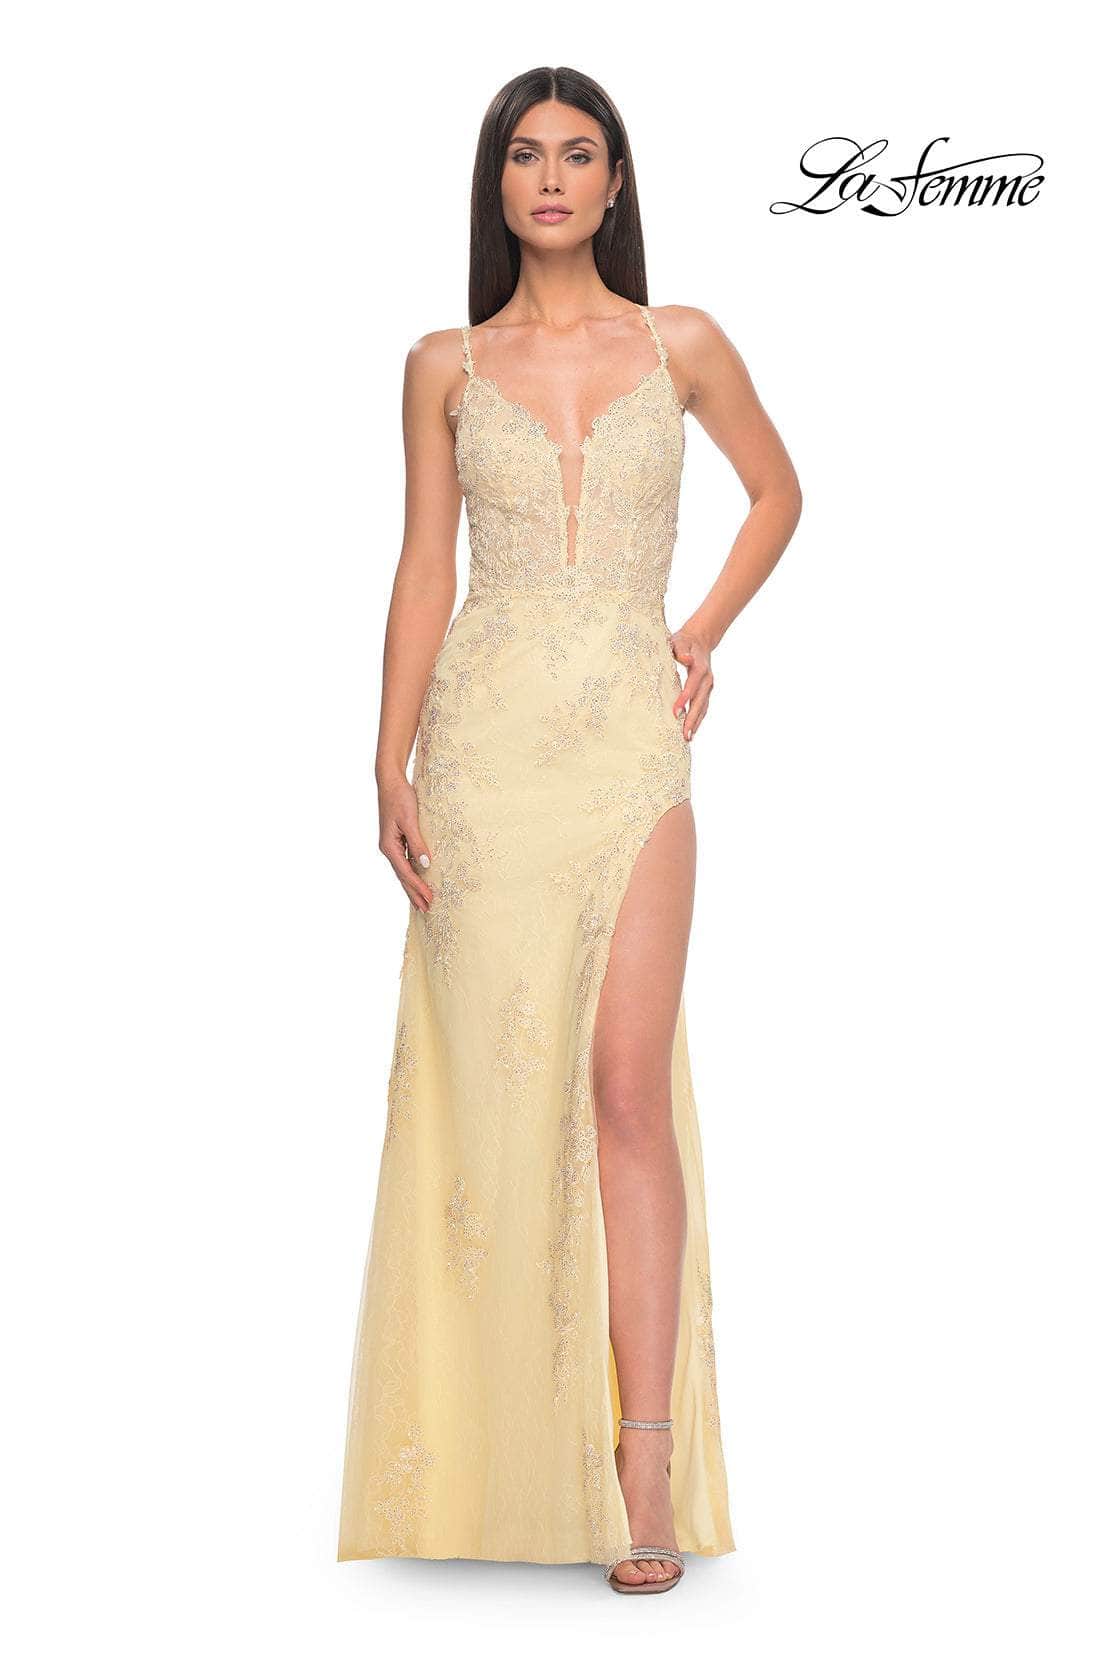 La Femme 32205 - Embroidered Plunging Neckline Prom Gown
